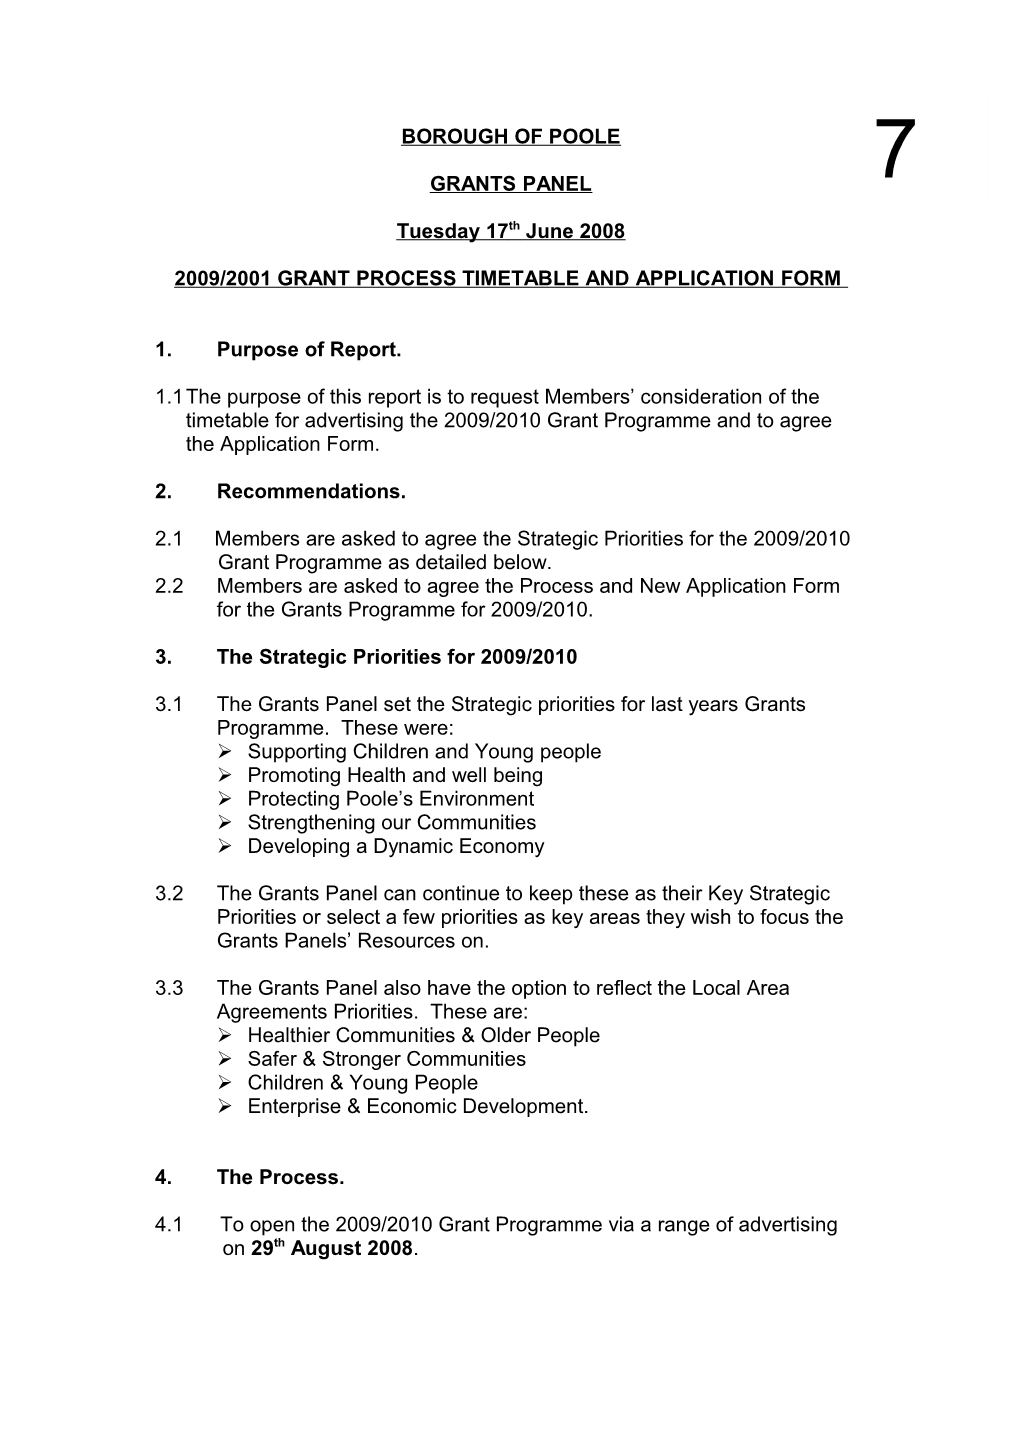 2009/2001 Grant Process Timetable and Application Form